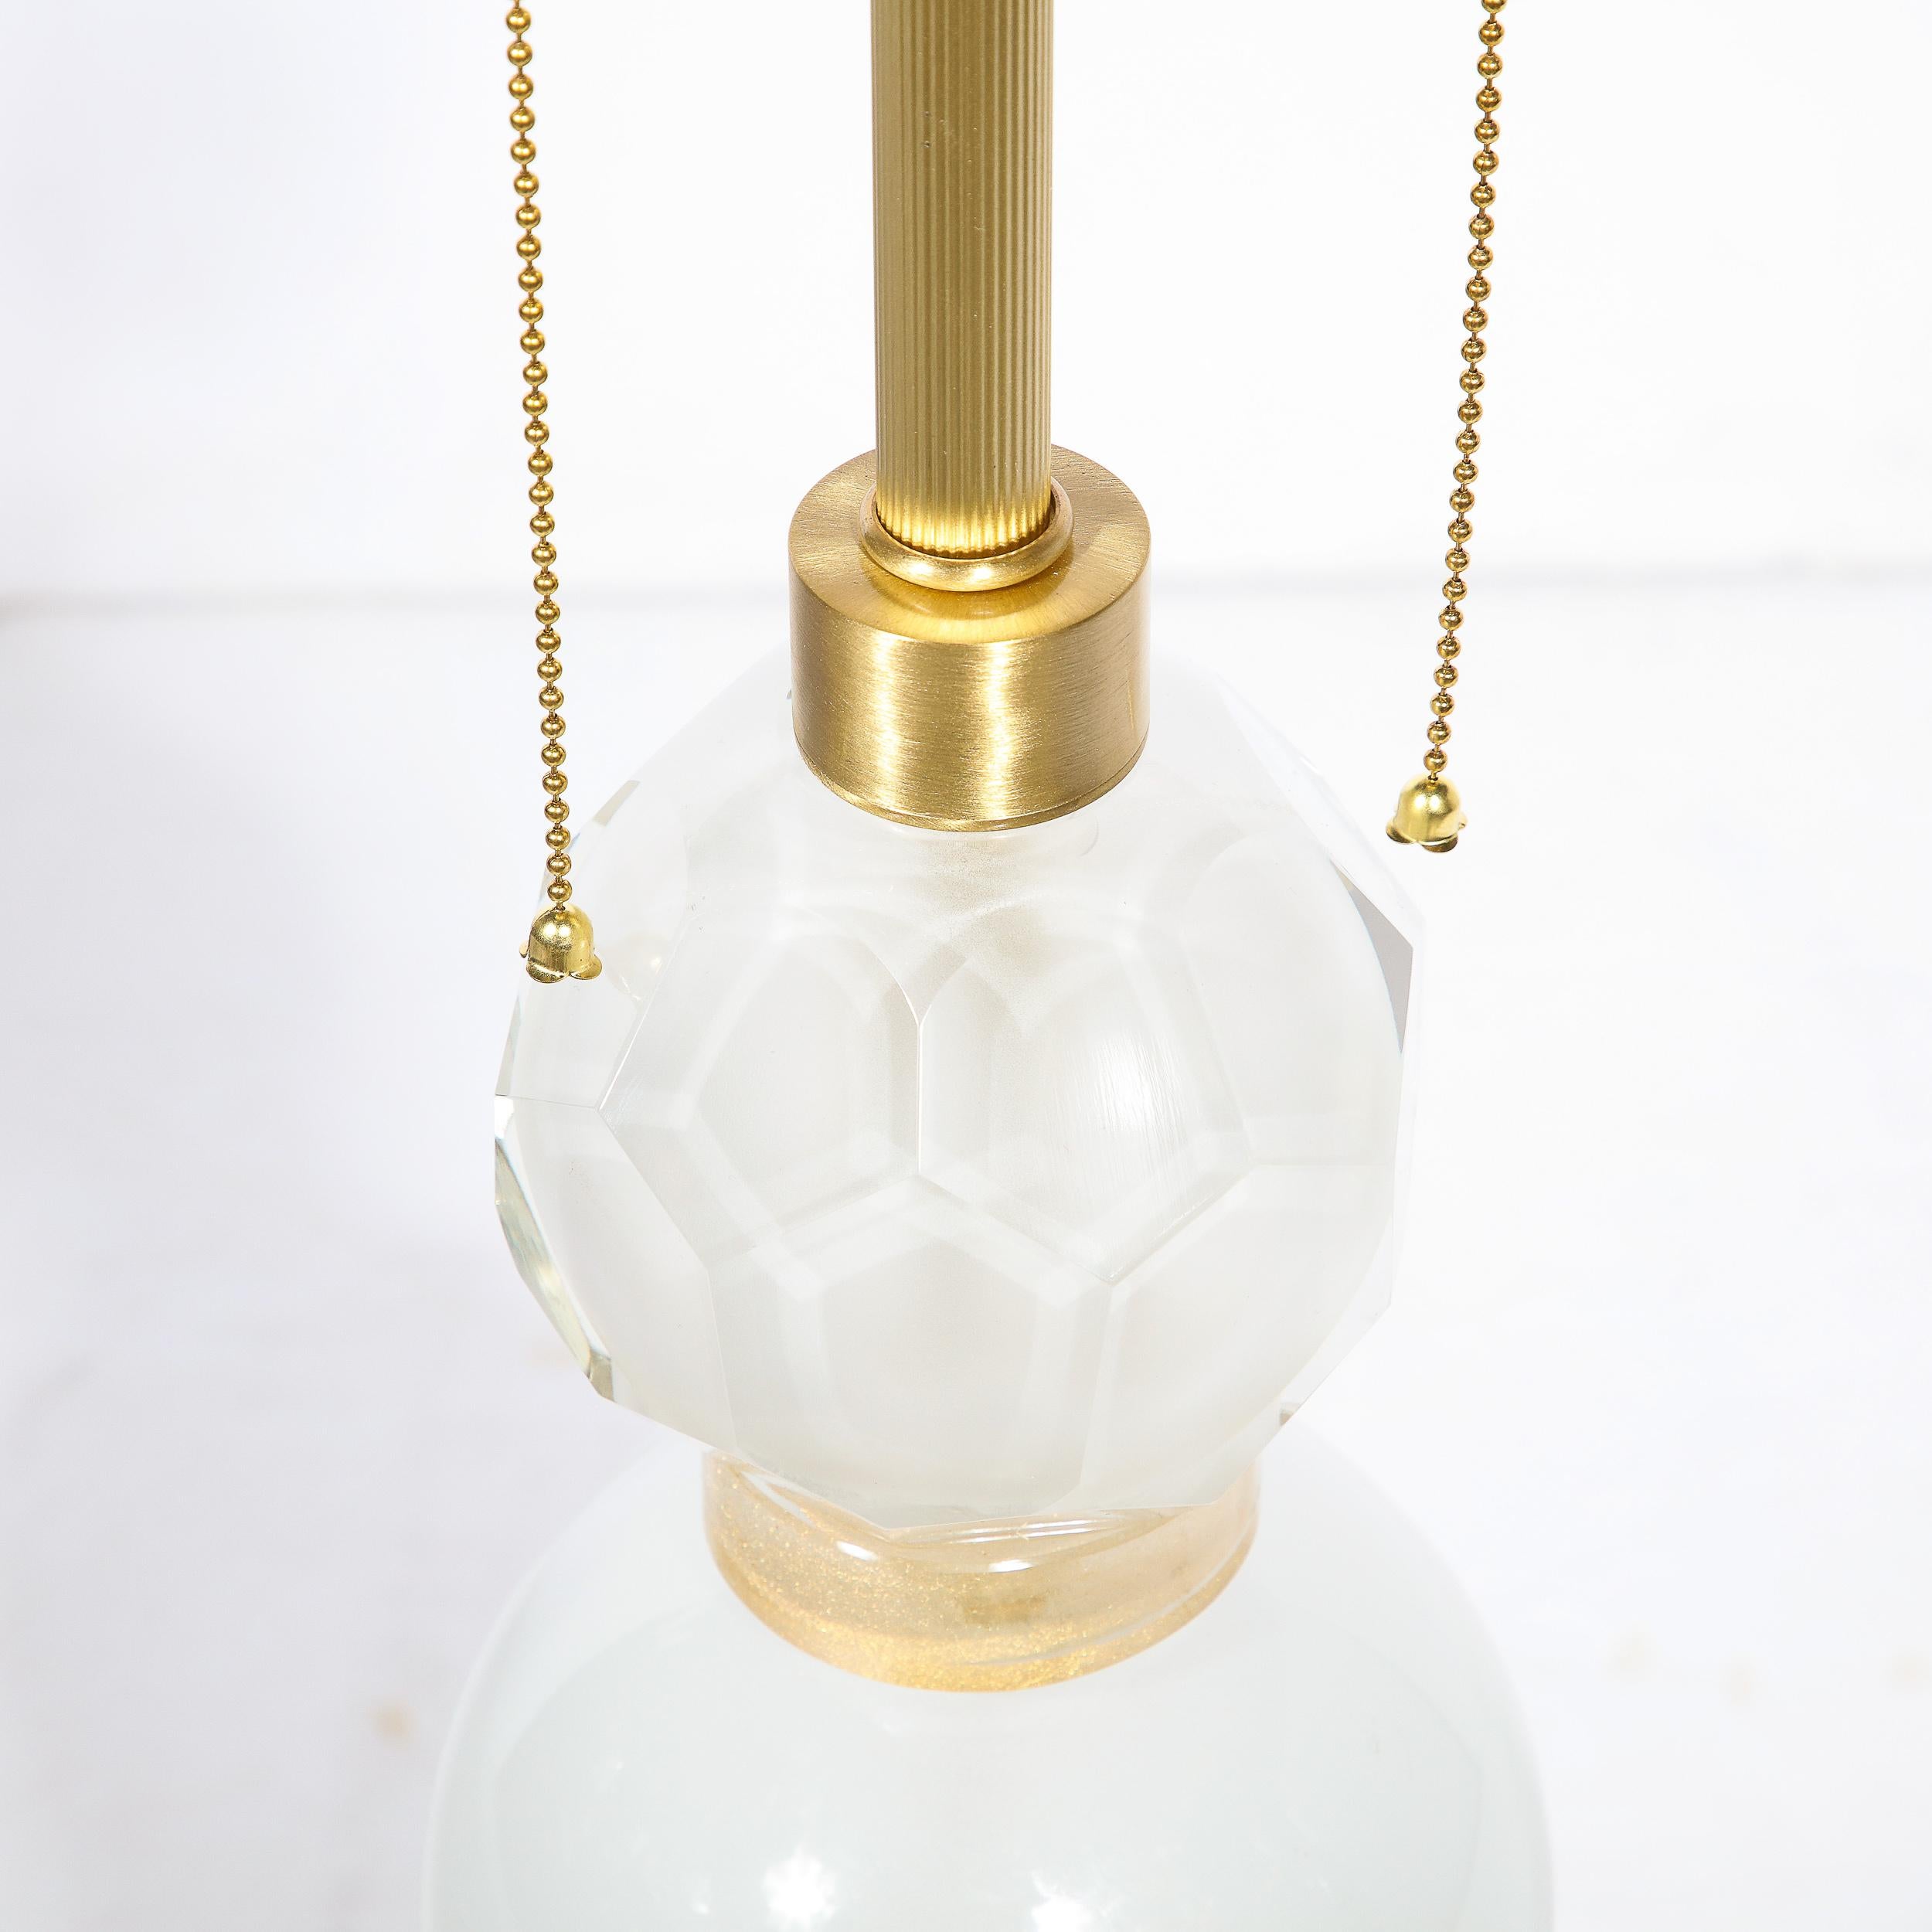 Pair of Hand-Blown White Murano Glass Lamps with 24K Gold Banded Detailing For Sale 5